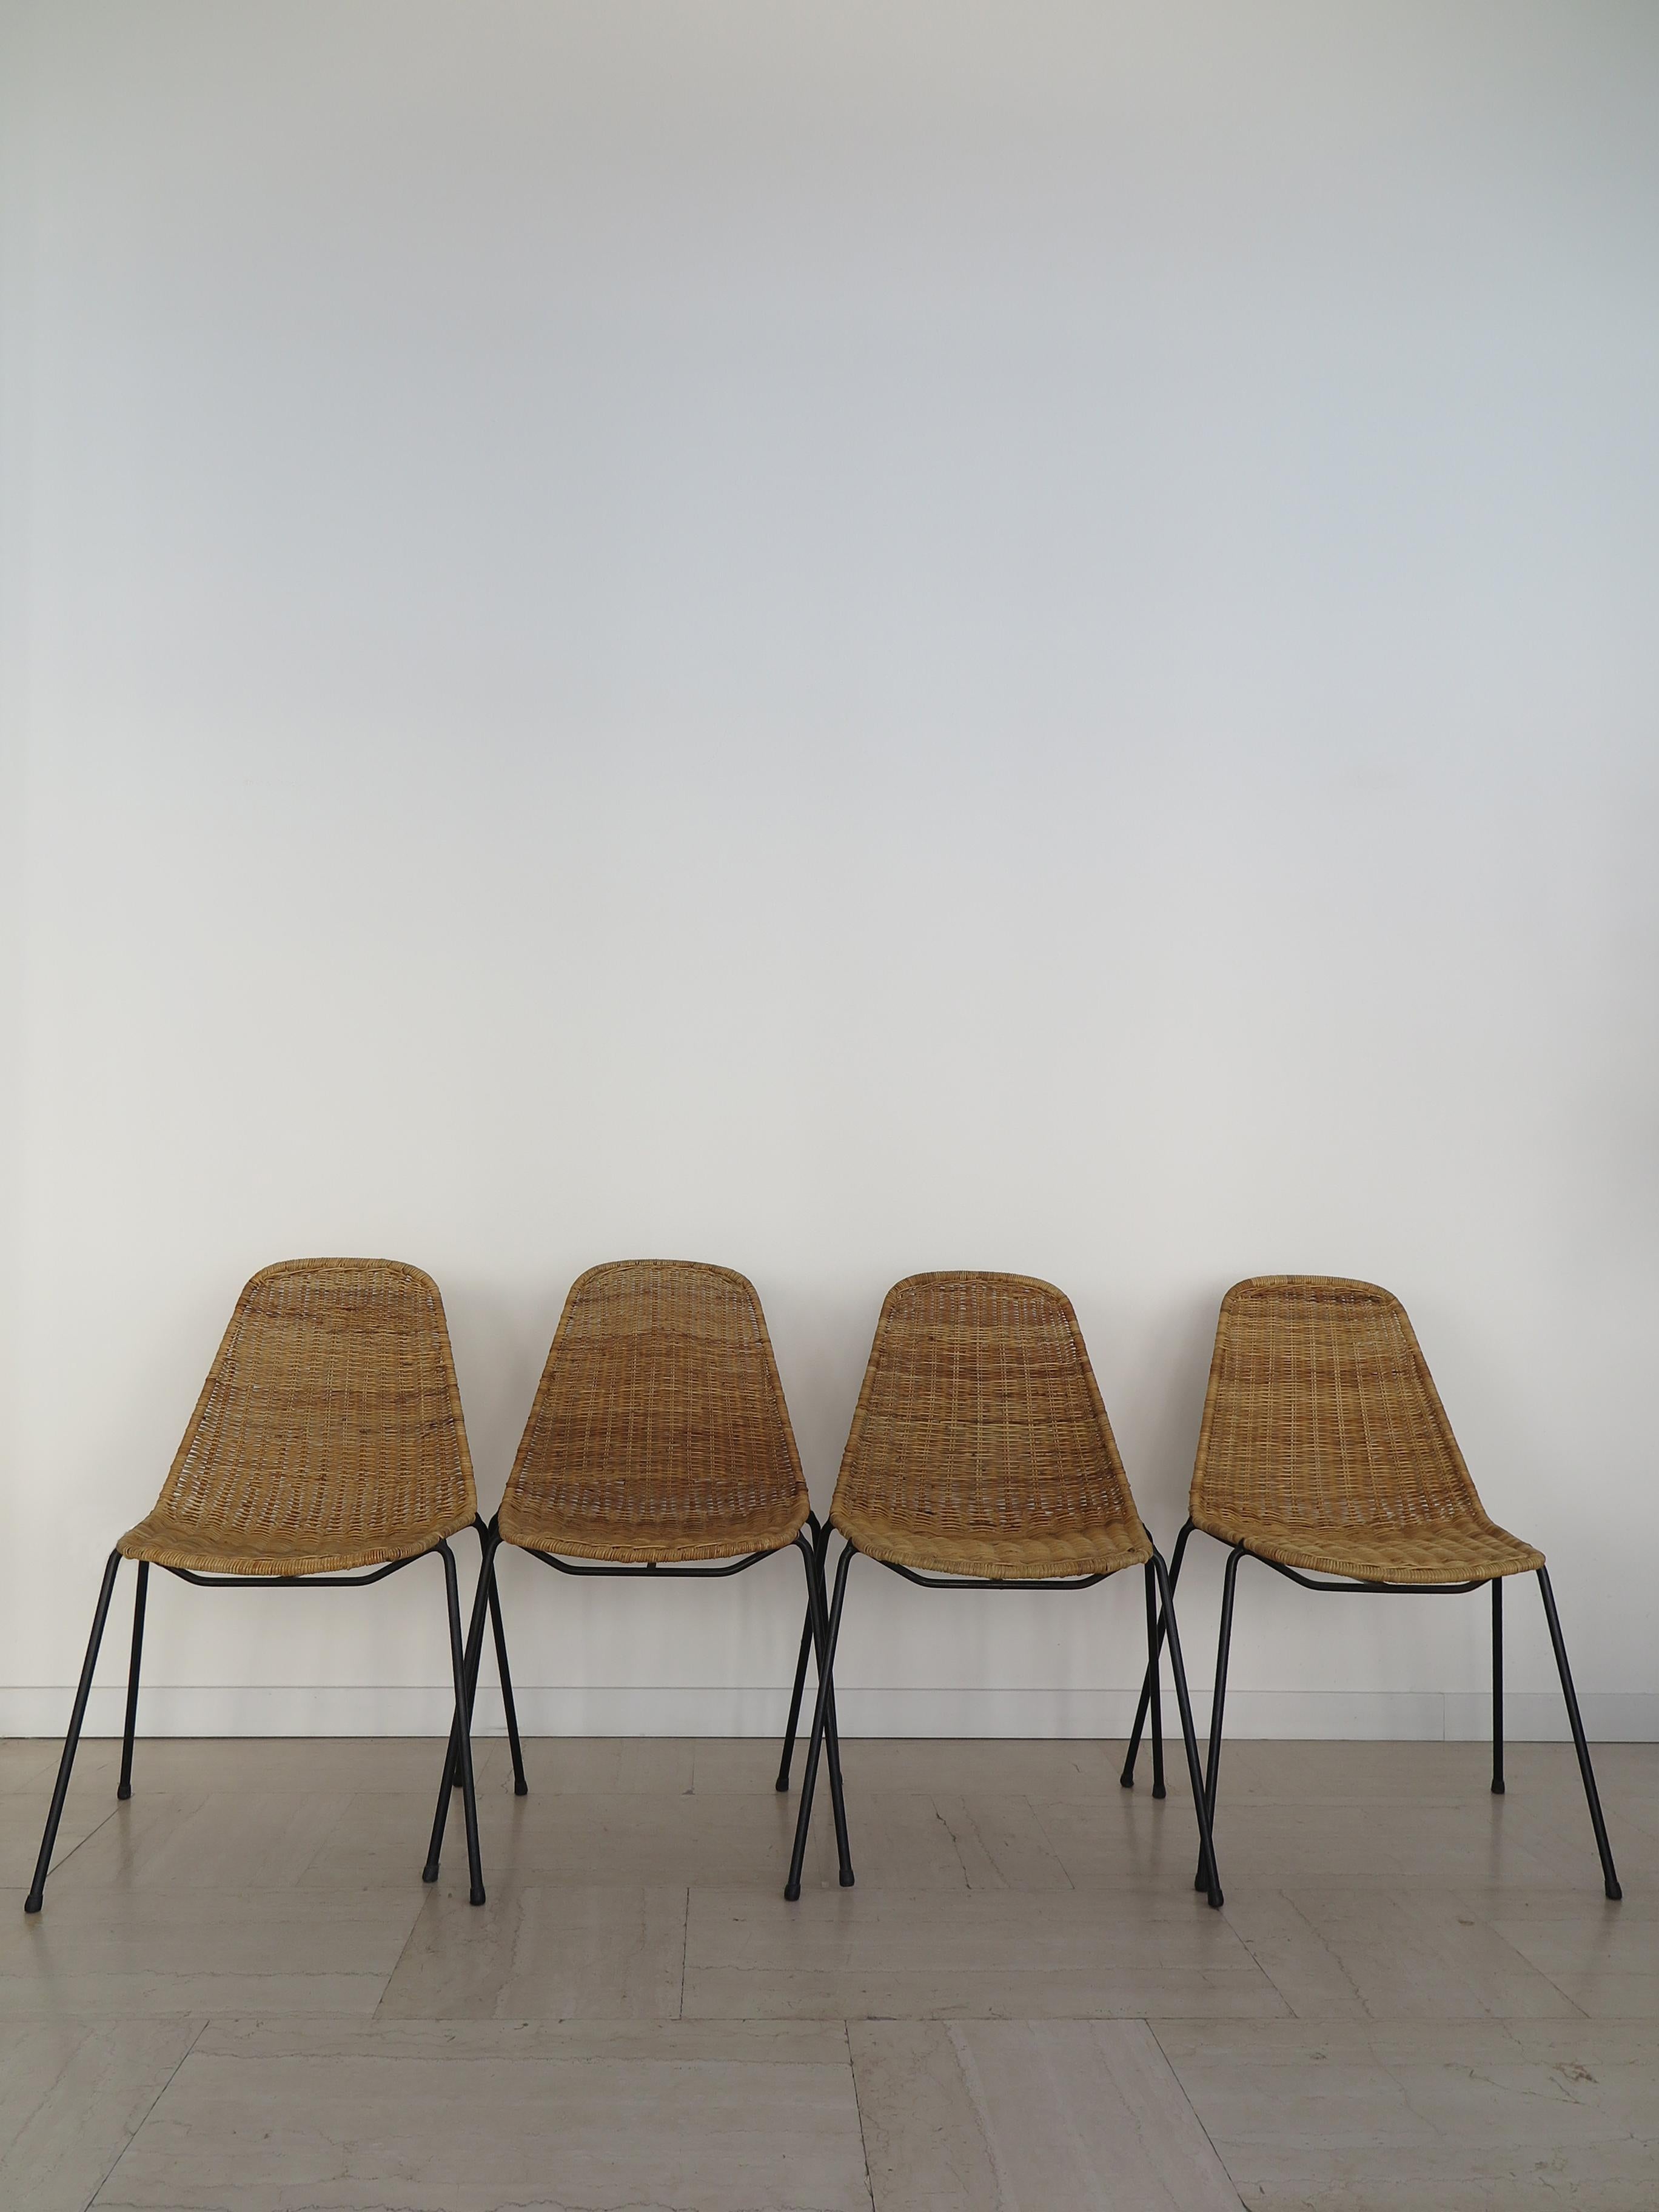 Set of four Italian midcentury modern design dining chairs with black laquered metal frame and rattan seat model Basket design by Franco Campo & Carlo Graffi and produced by Home, Italy 1950s.

Please note that the chairs are original of the period